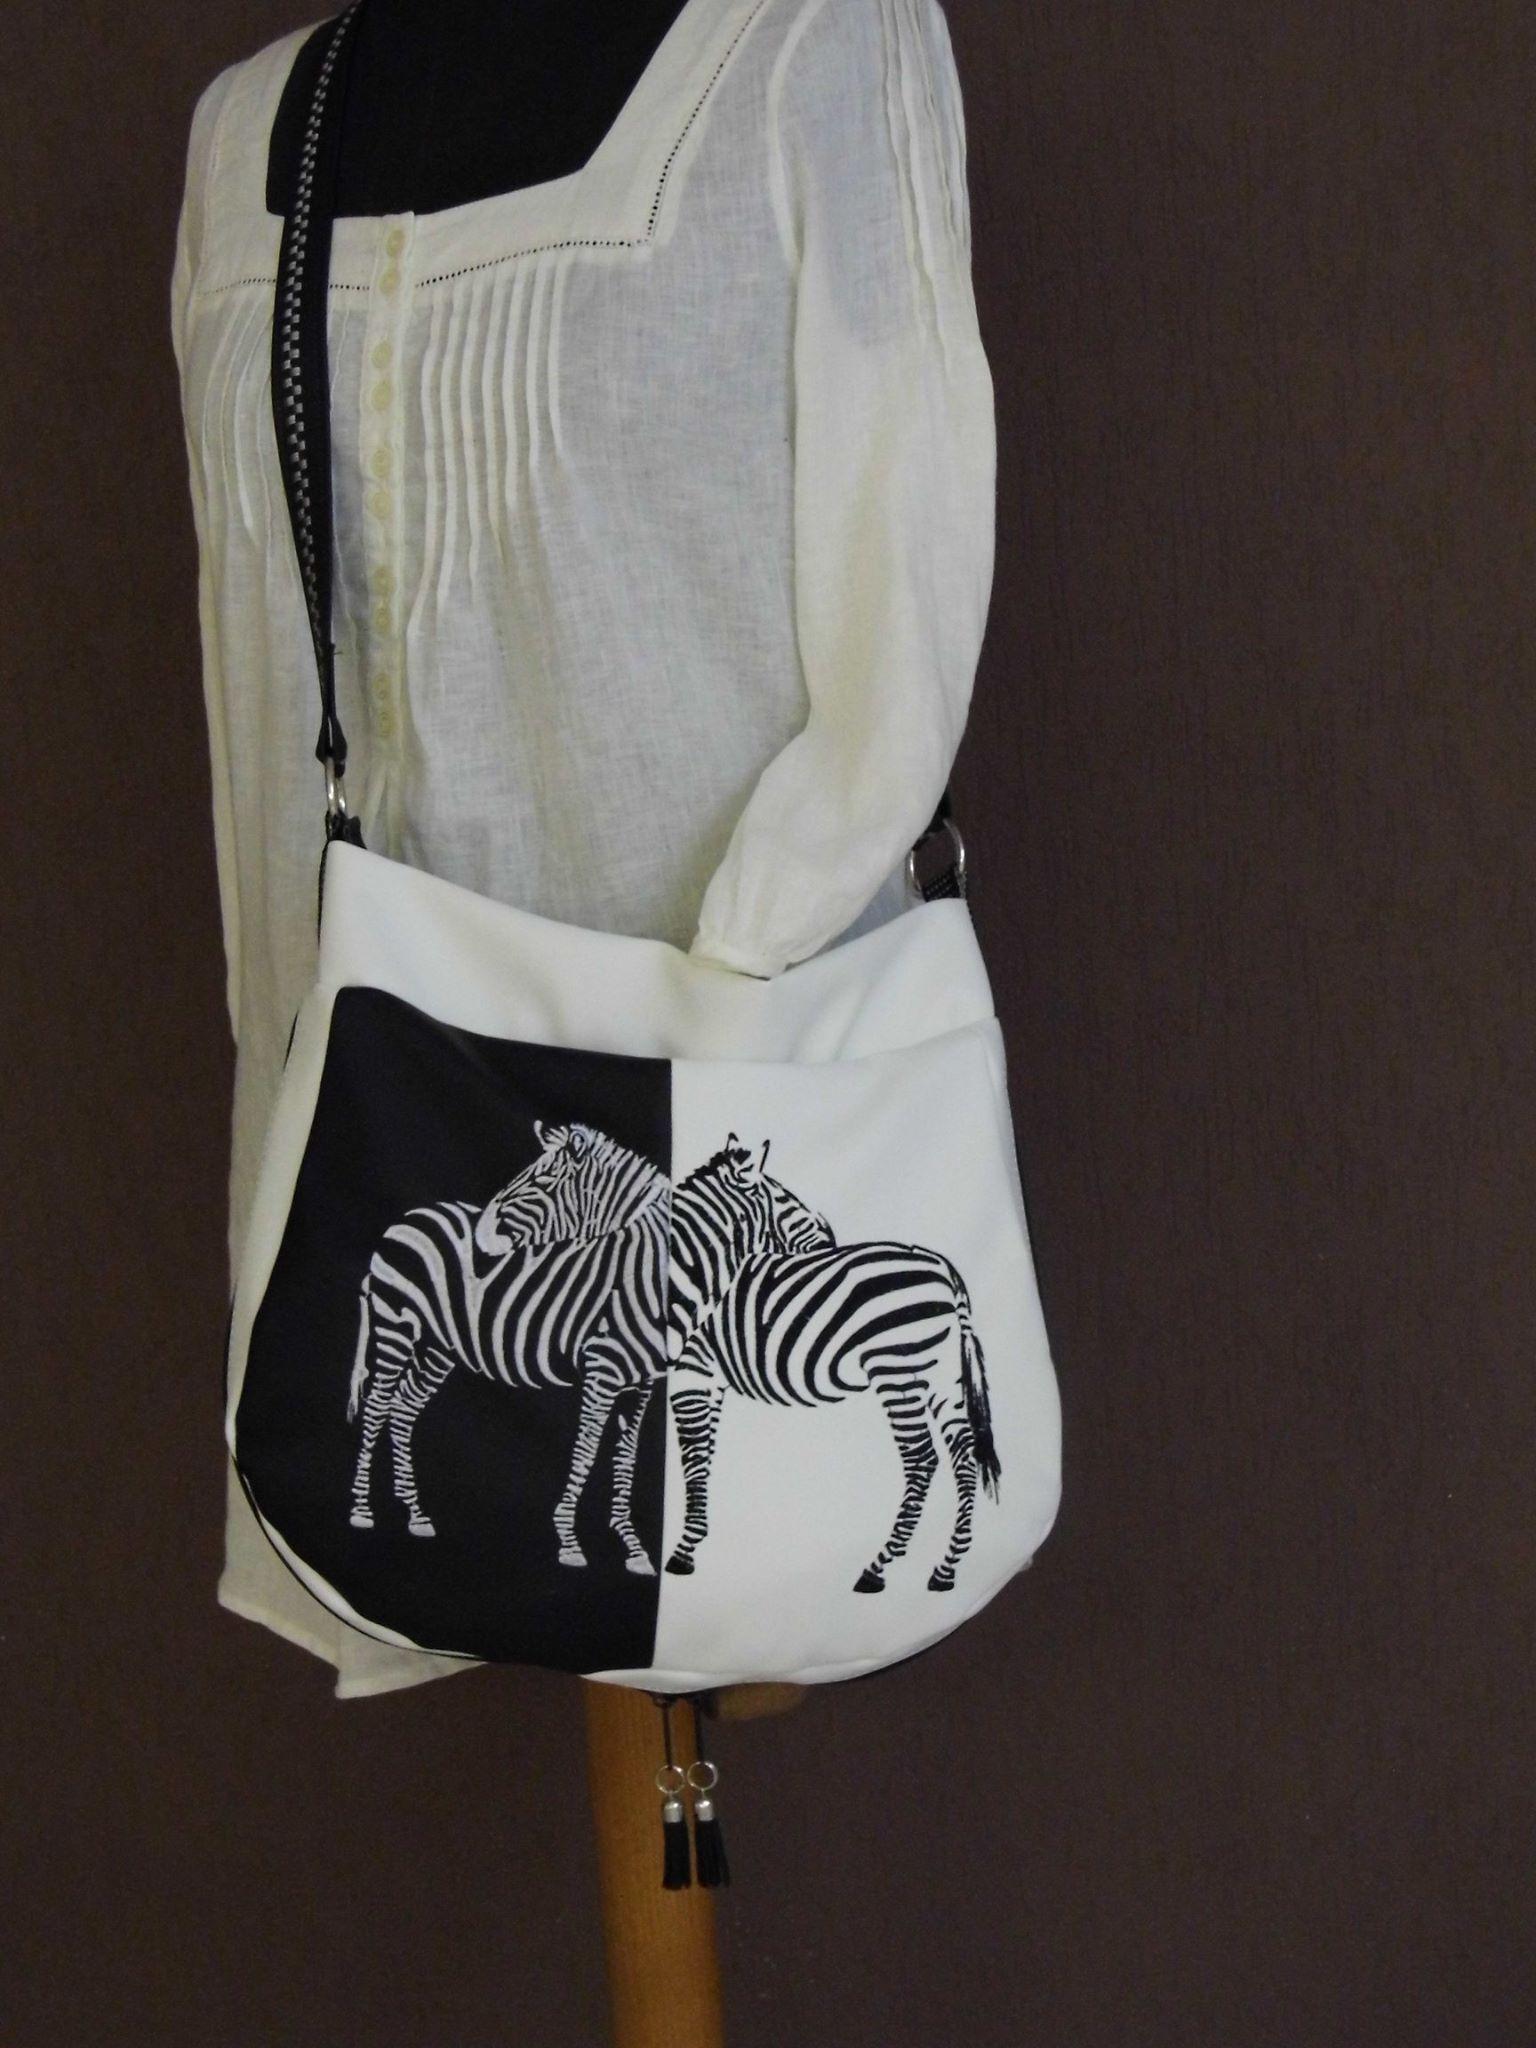 Adorable women's bag with zebras free machine embroidery design